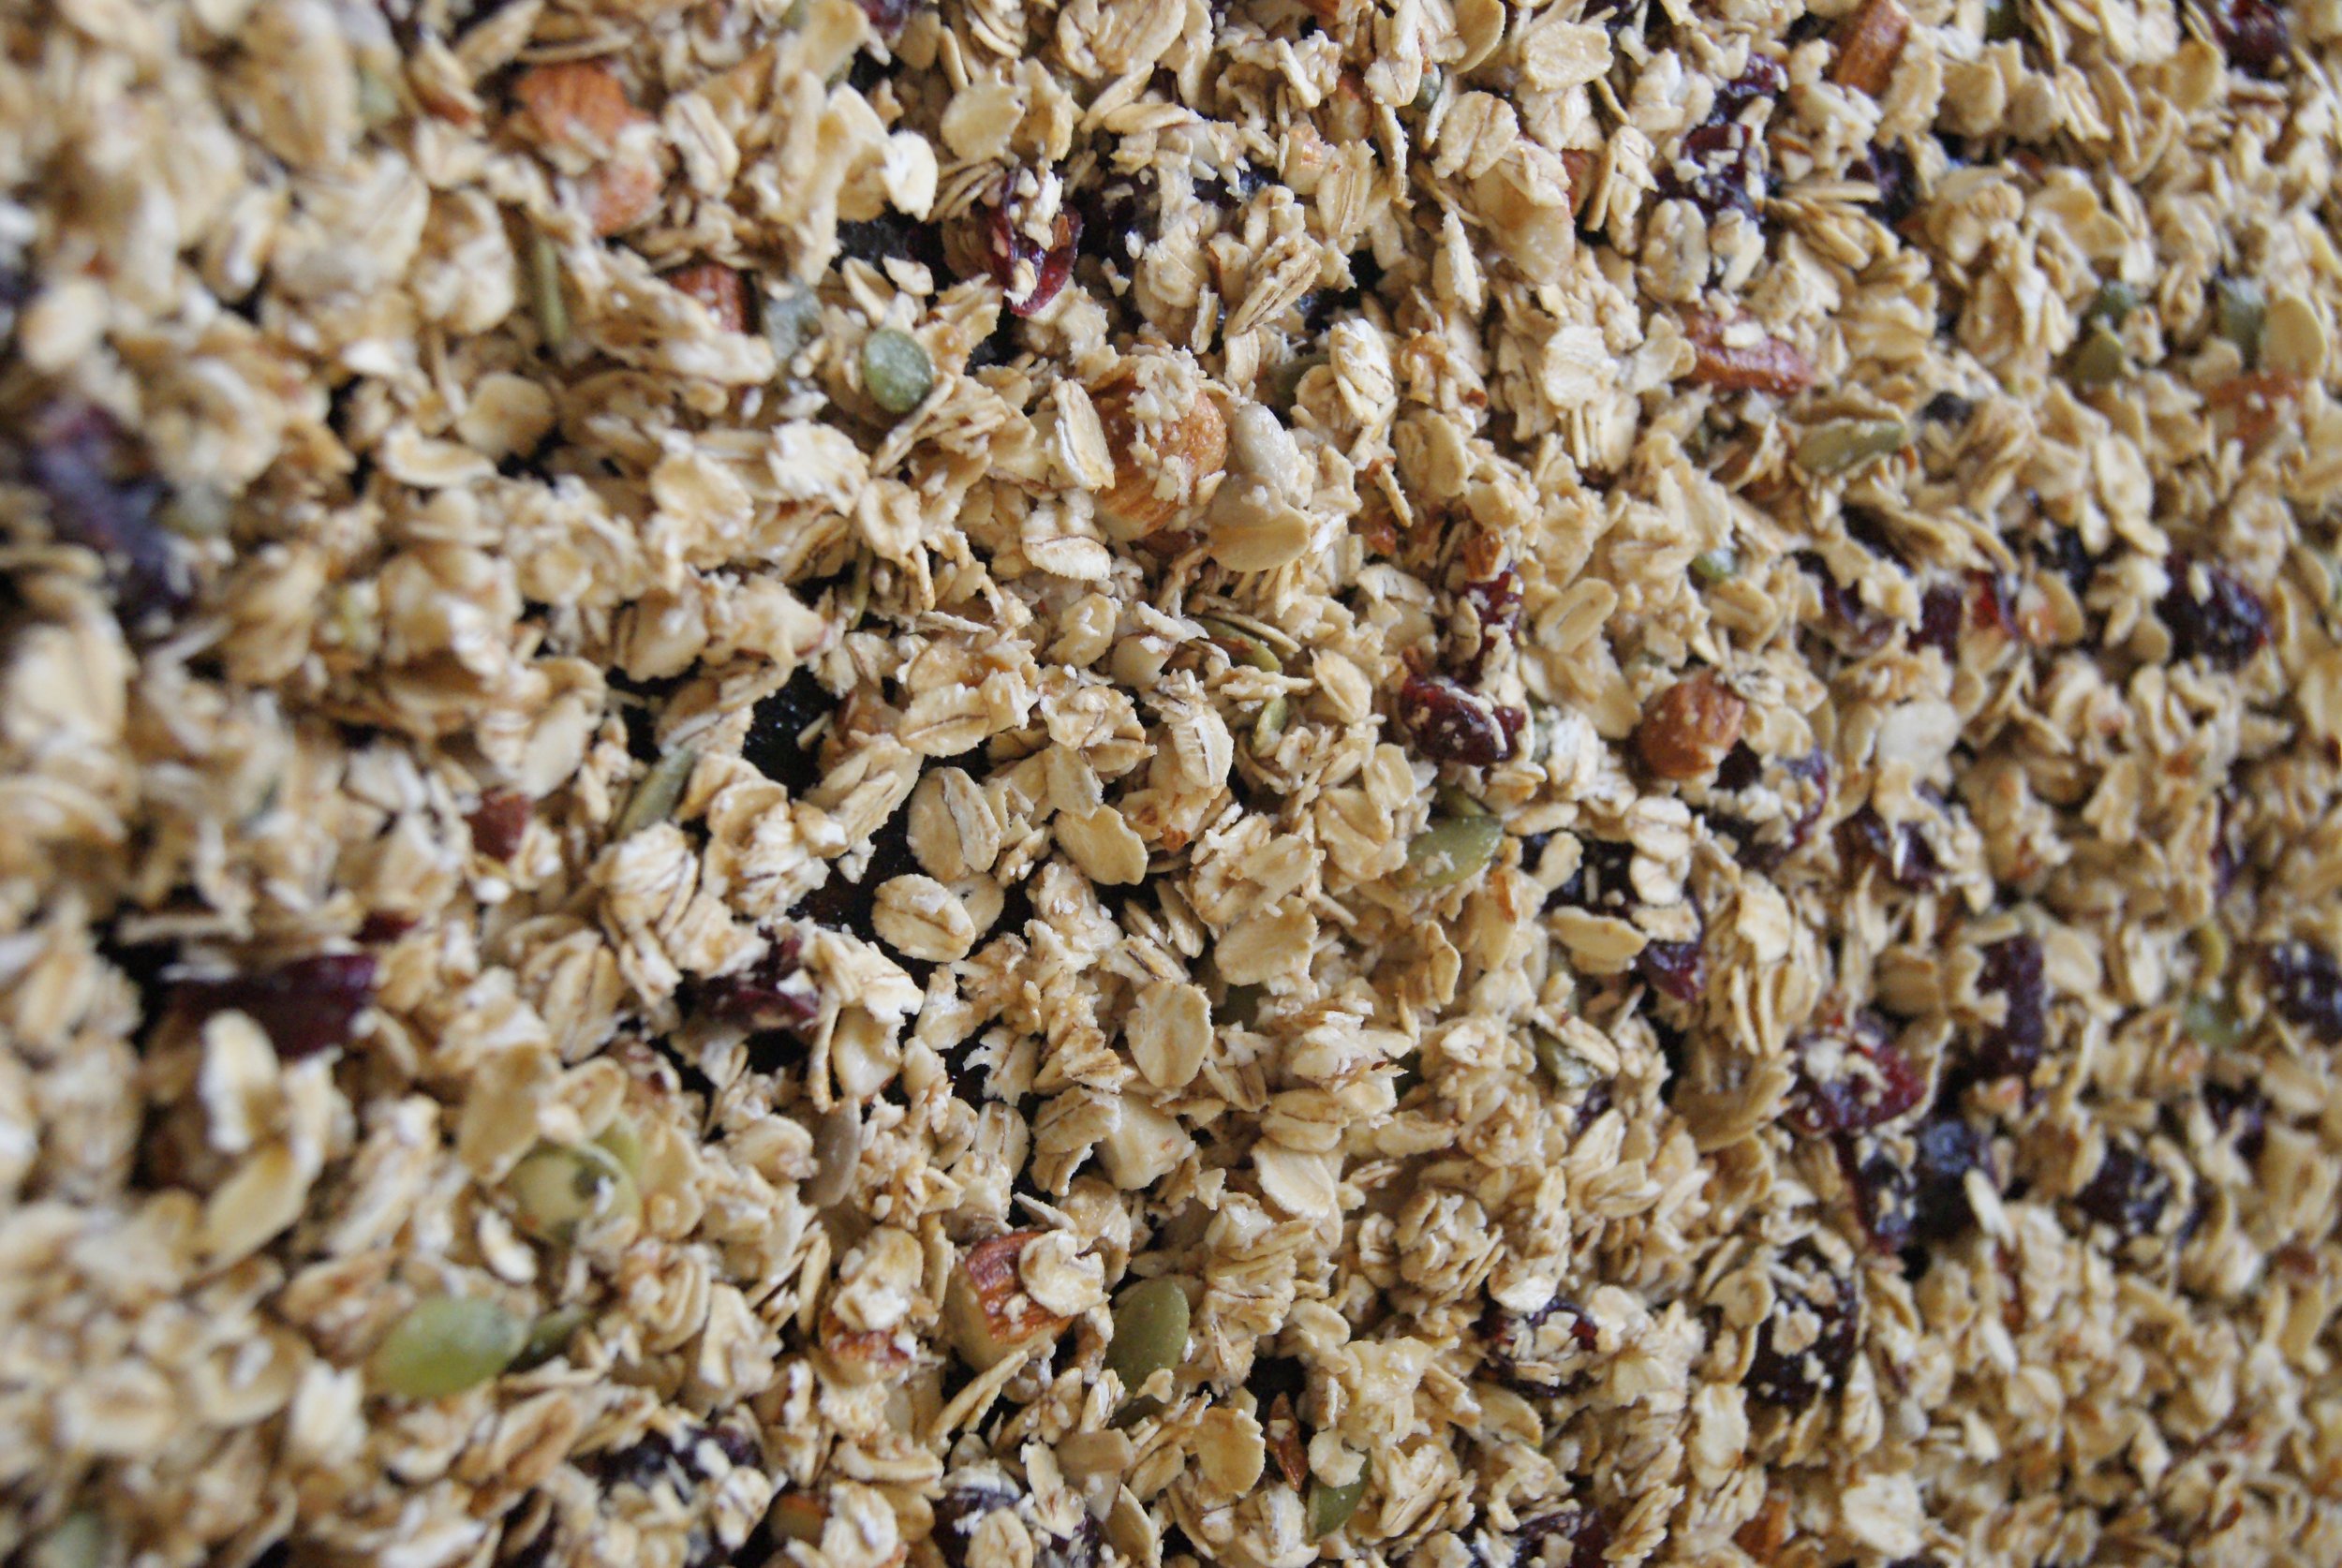 Upclose-and-personal with granola